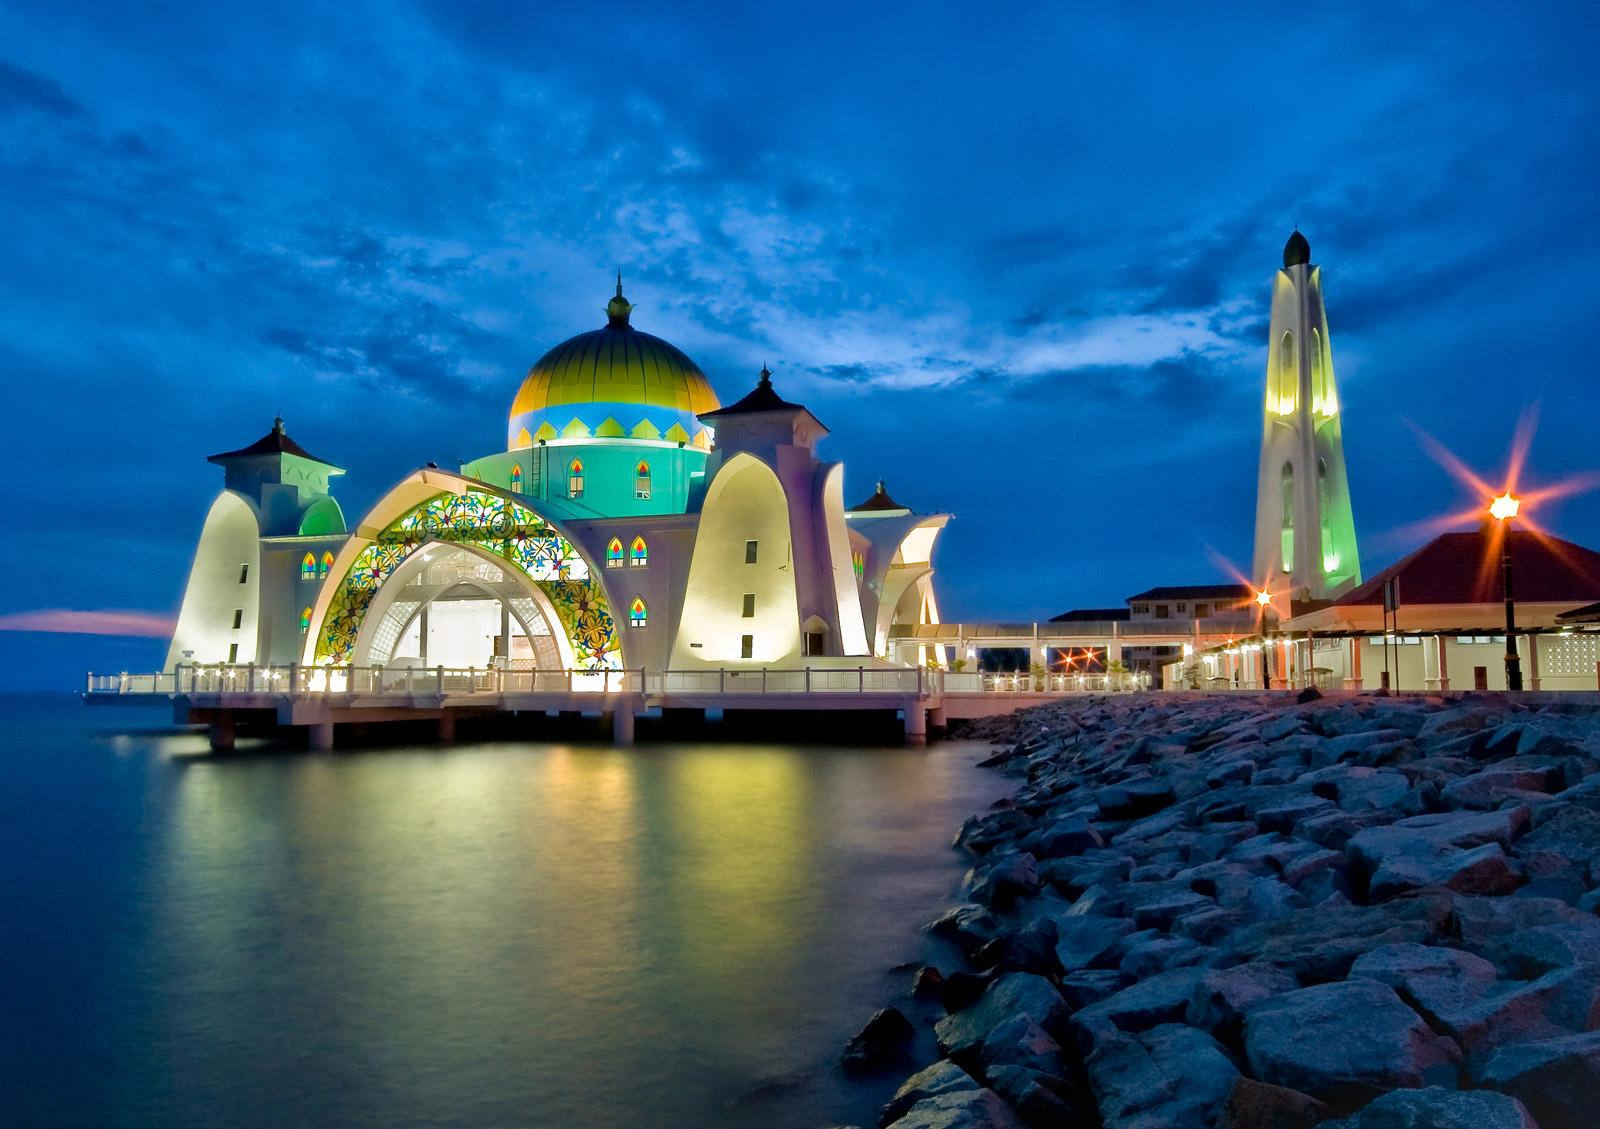 Most Beautiful Mosque